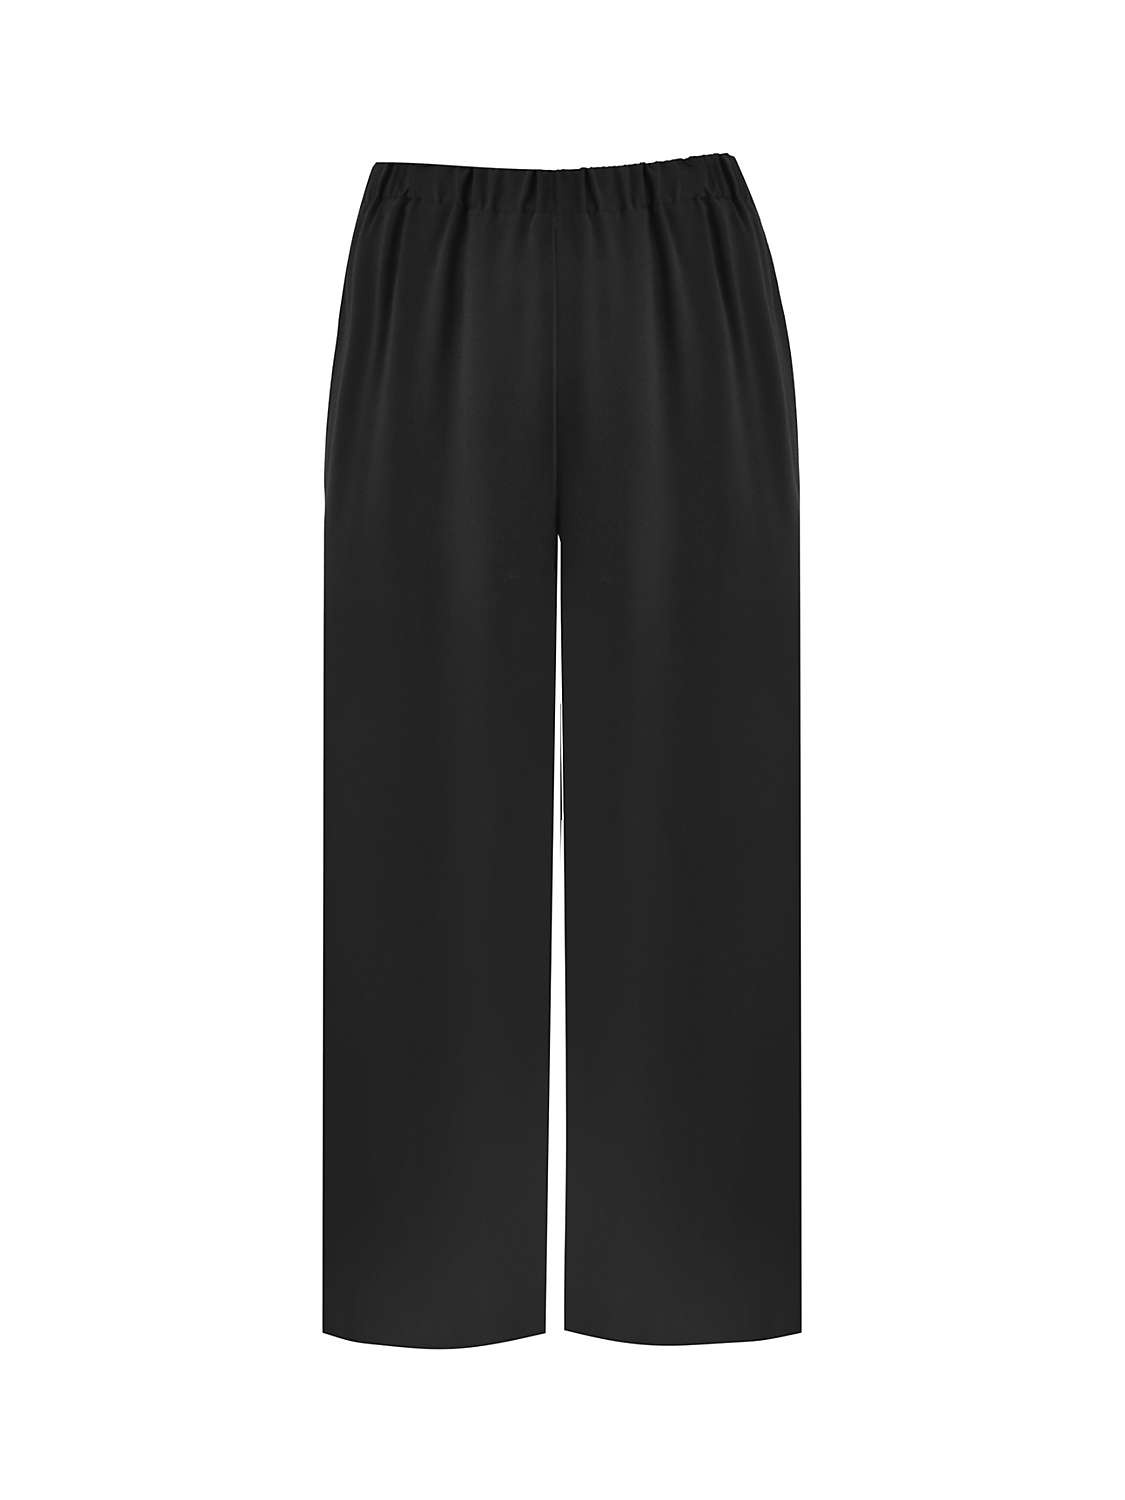 Buy Live Unlimited Curve Petite Pull-On Cropped Trousers, Black Online at johnlewis.com